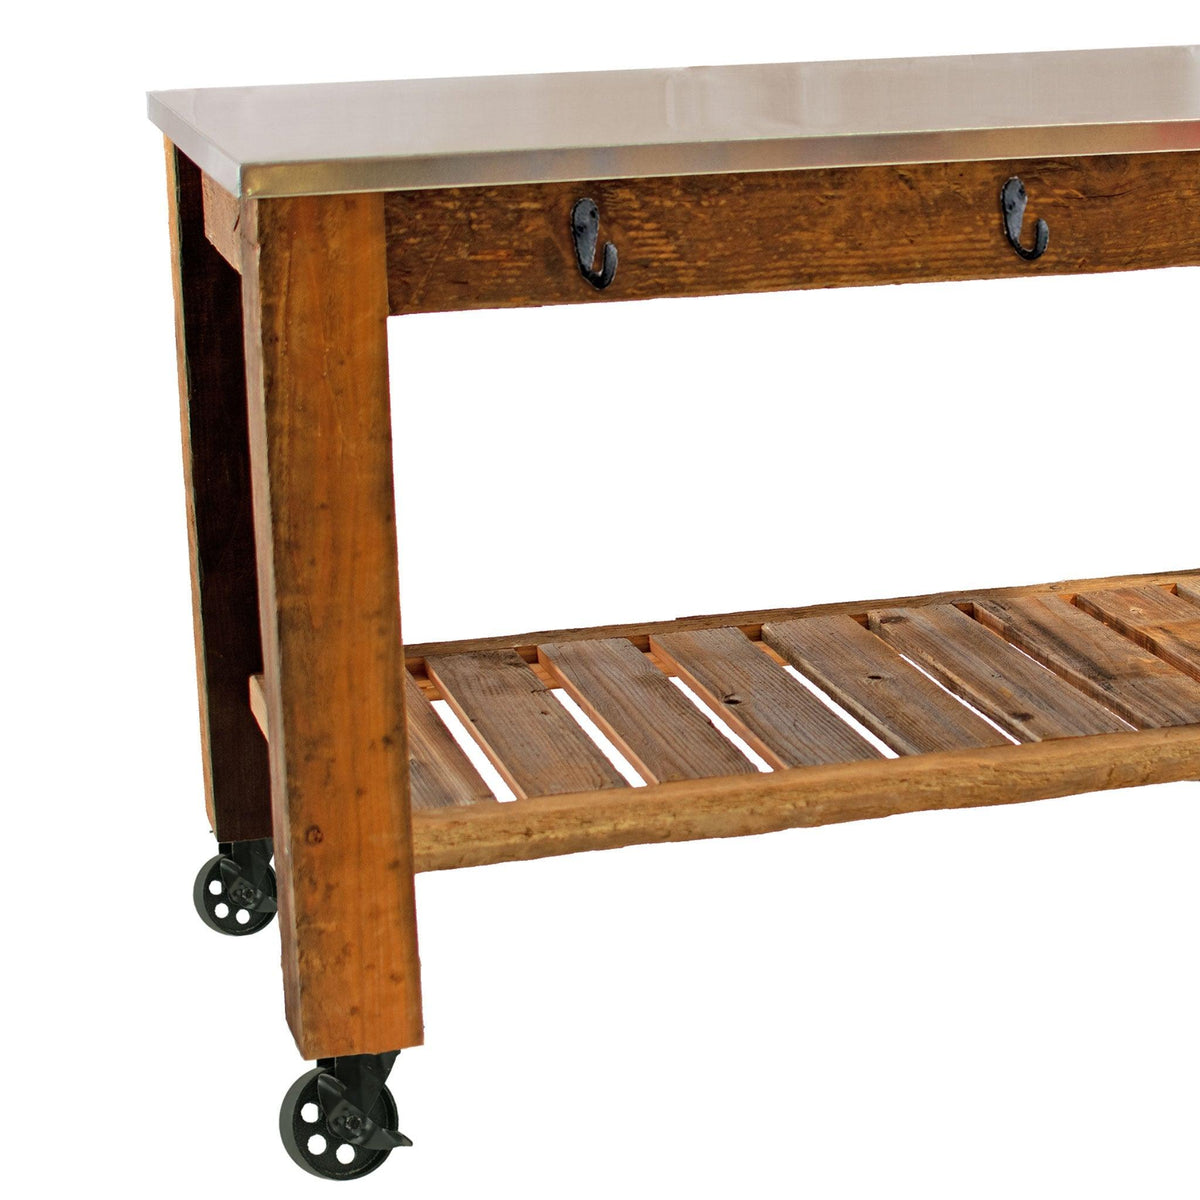 Side photo of Lee Display's Redwood Potting Table Rolling Cart with 5in Black Casters with Hardware Included on sale now at leedisplay.com